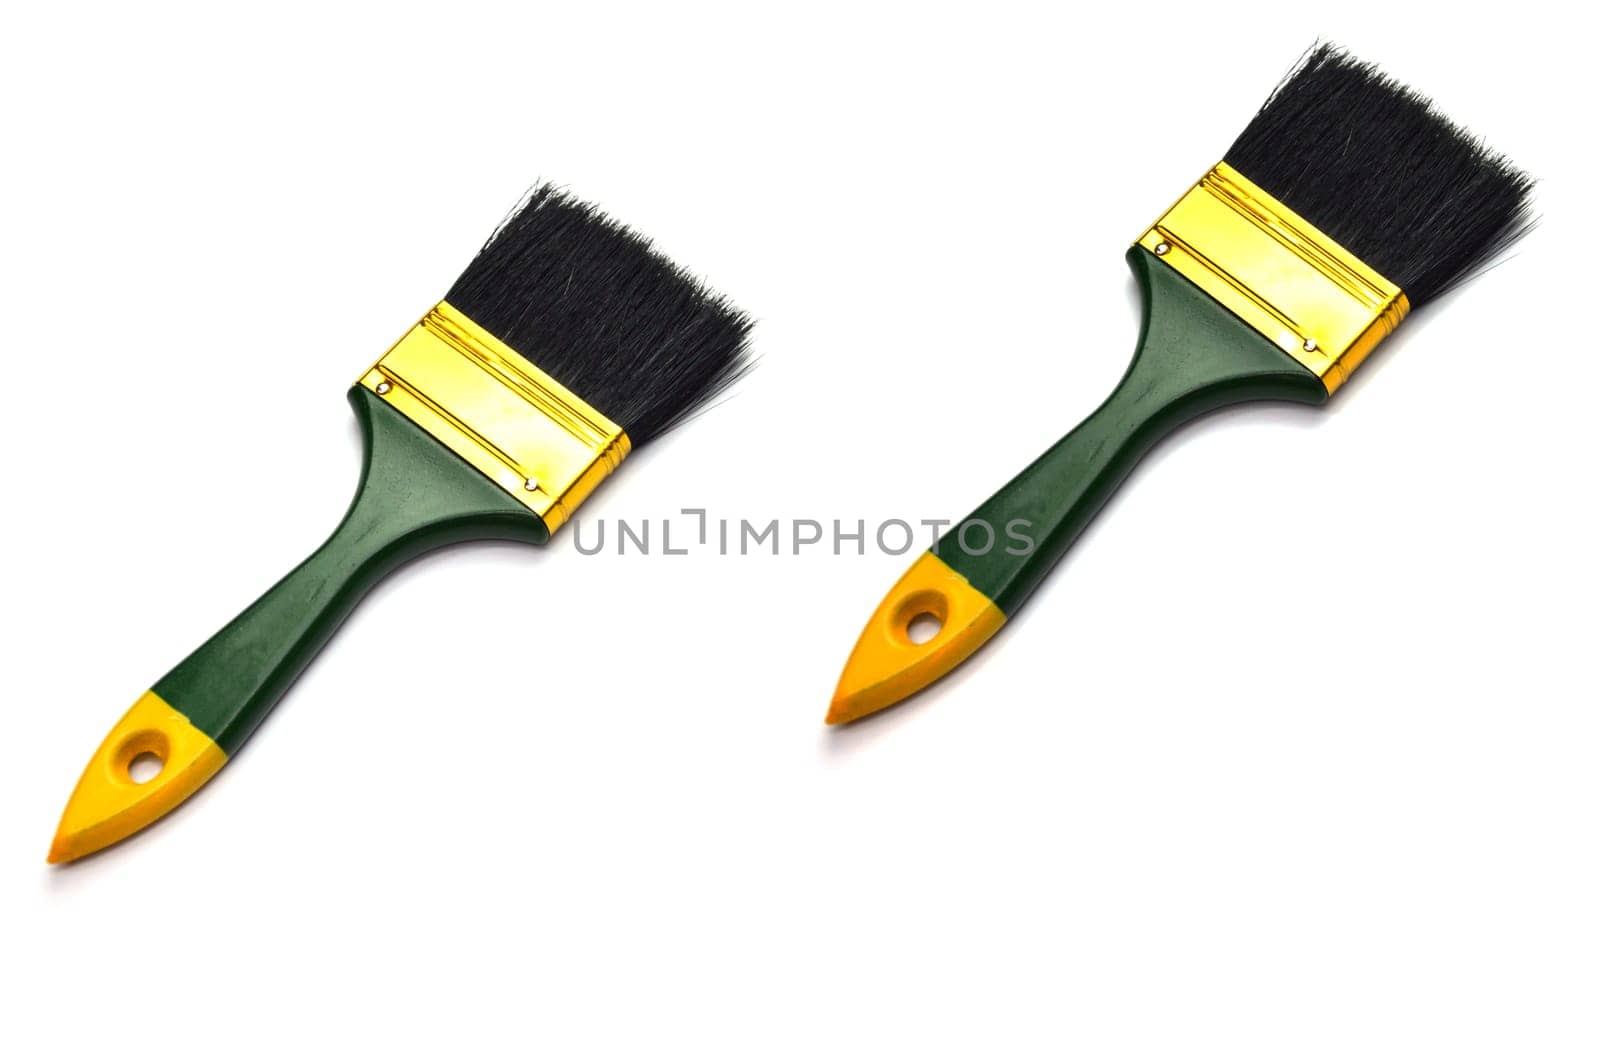 2 paint brushes placed on a white background